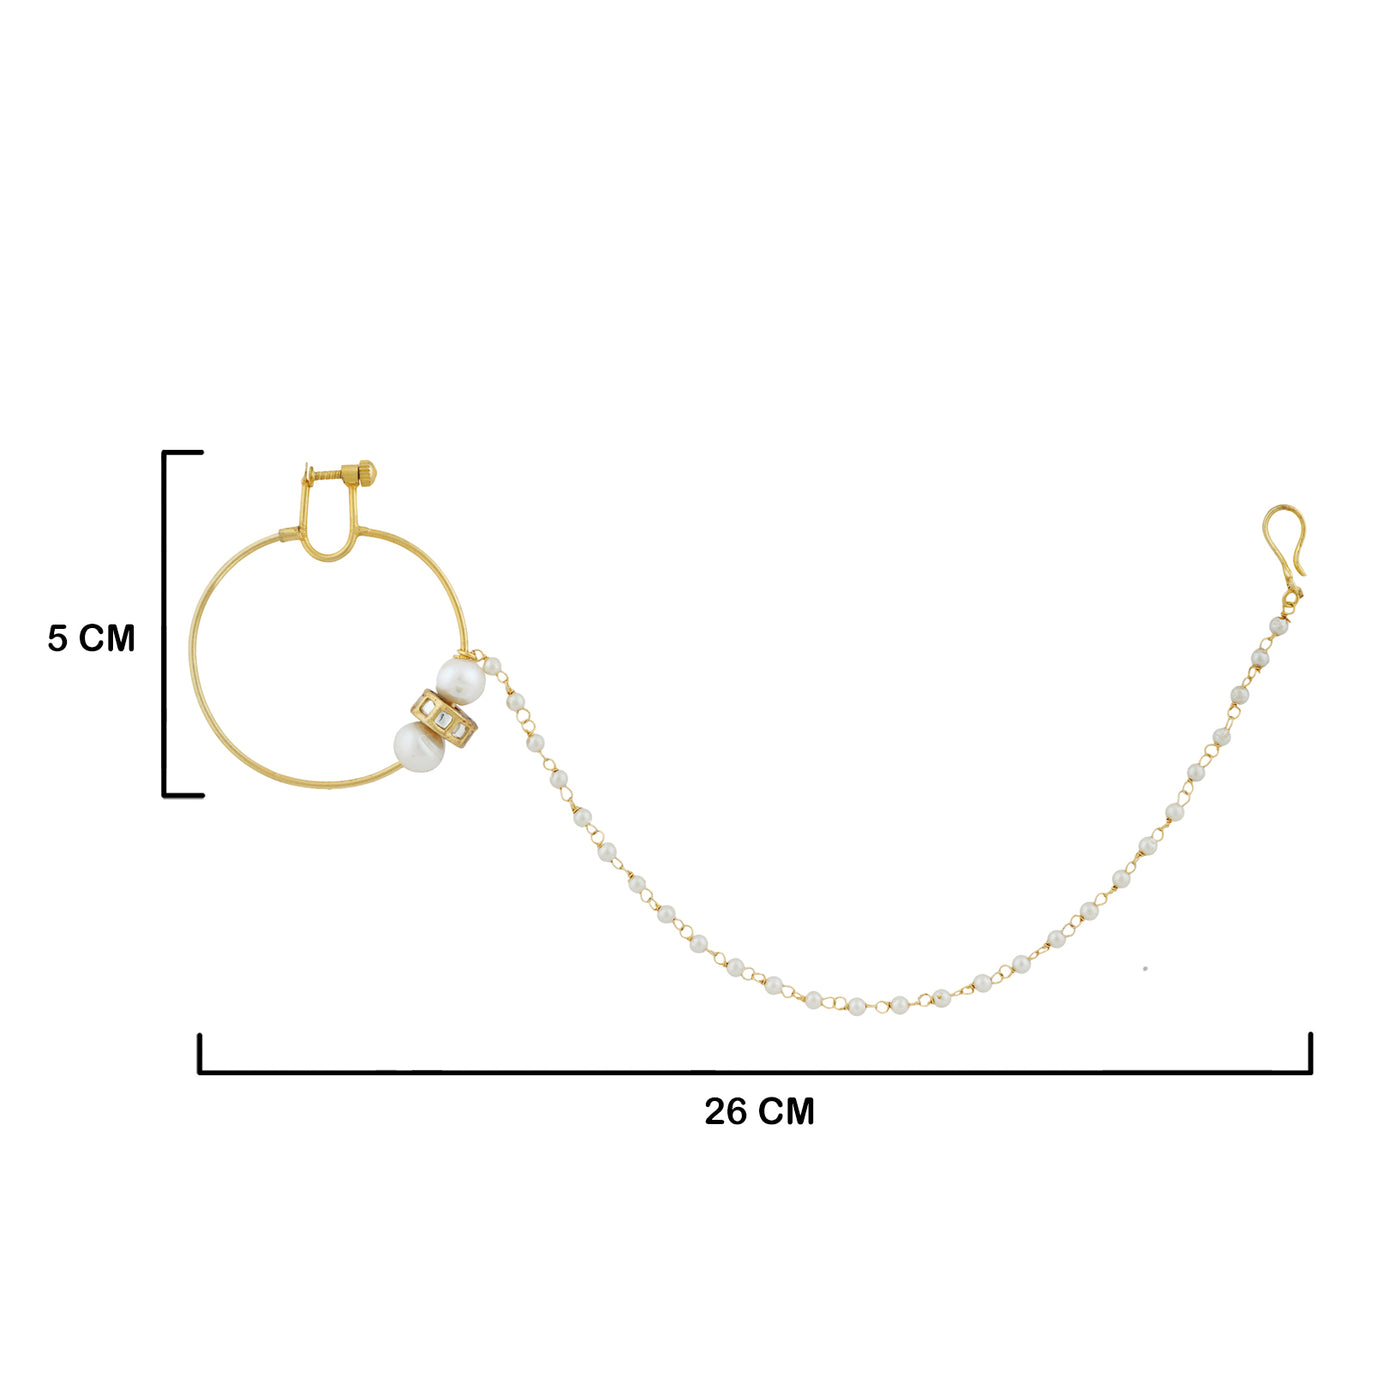 Pearled Kundan Nose Ring with measurements in cm. 5cm Ring. 26cm Chain.